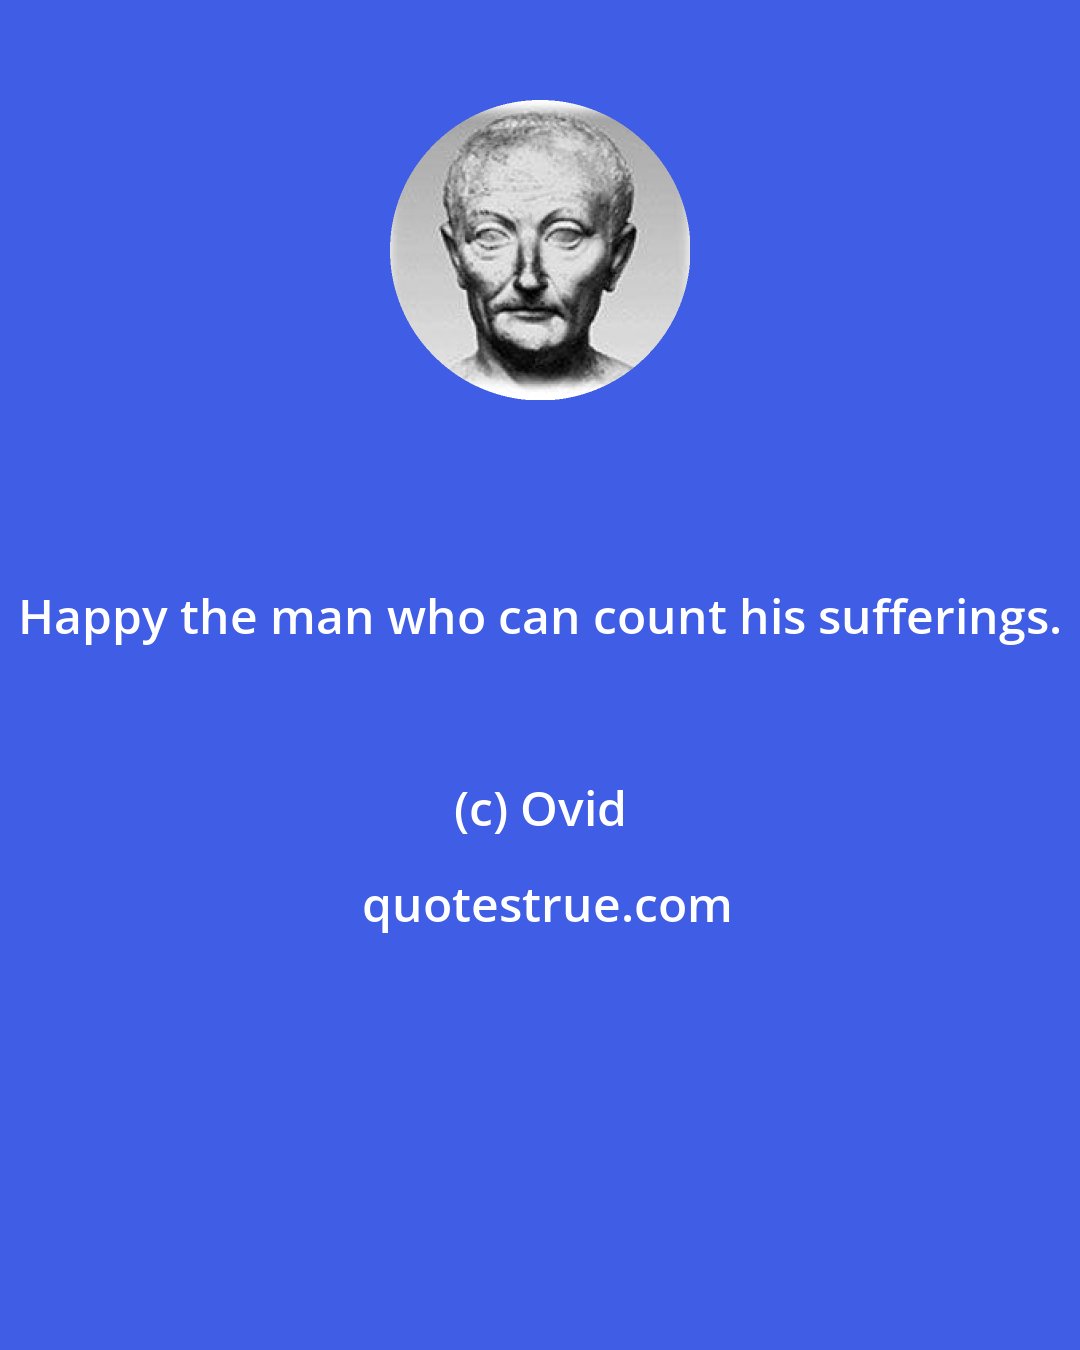 Ovid: Happy the man who can count his sufferings.